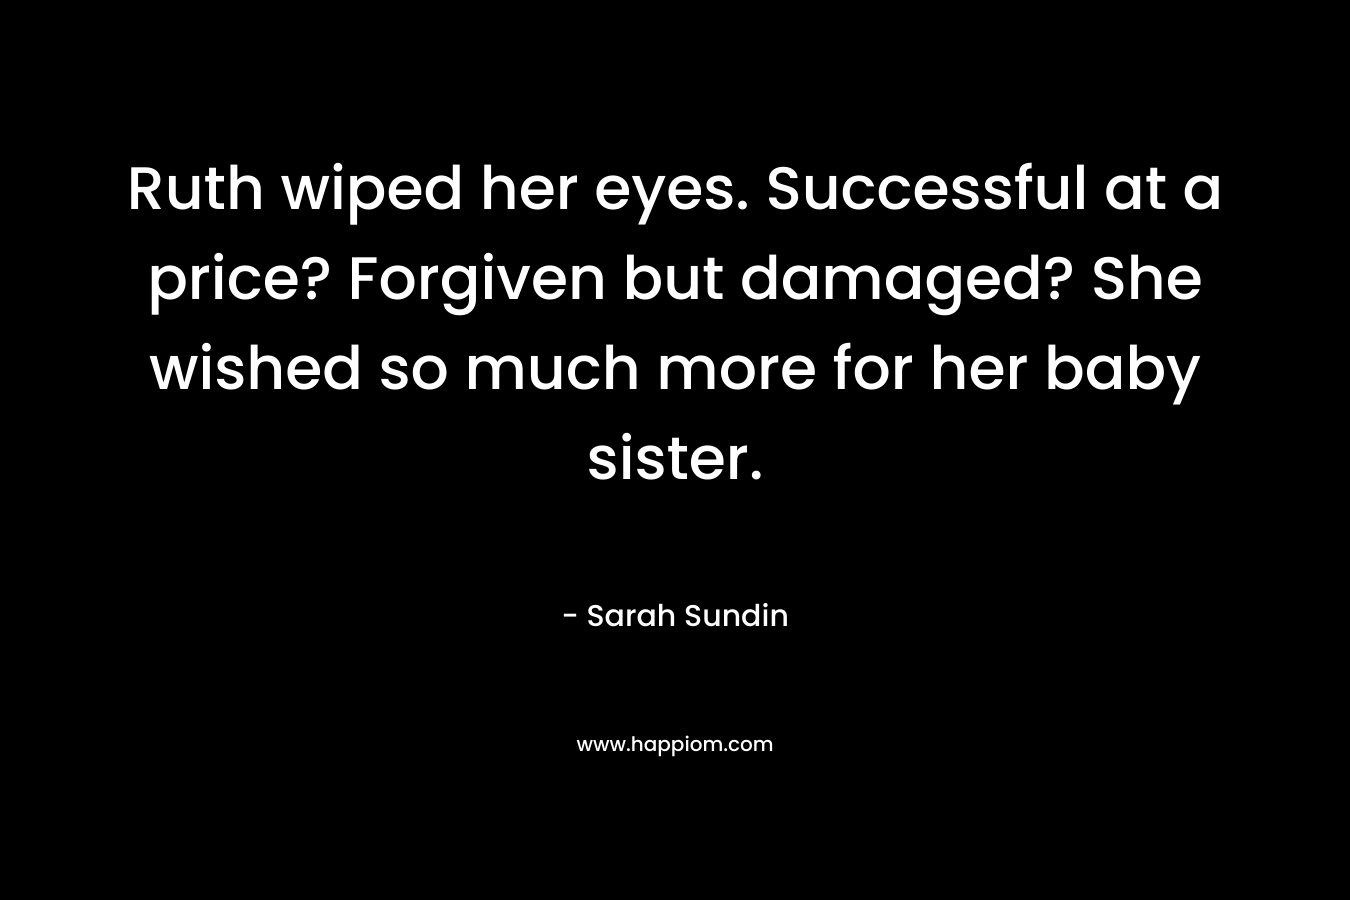 Ruth wiped her eyes. Successful at a price? Forgiven but damaged? She wished so much more for her baby sister. – Sarah Sundin